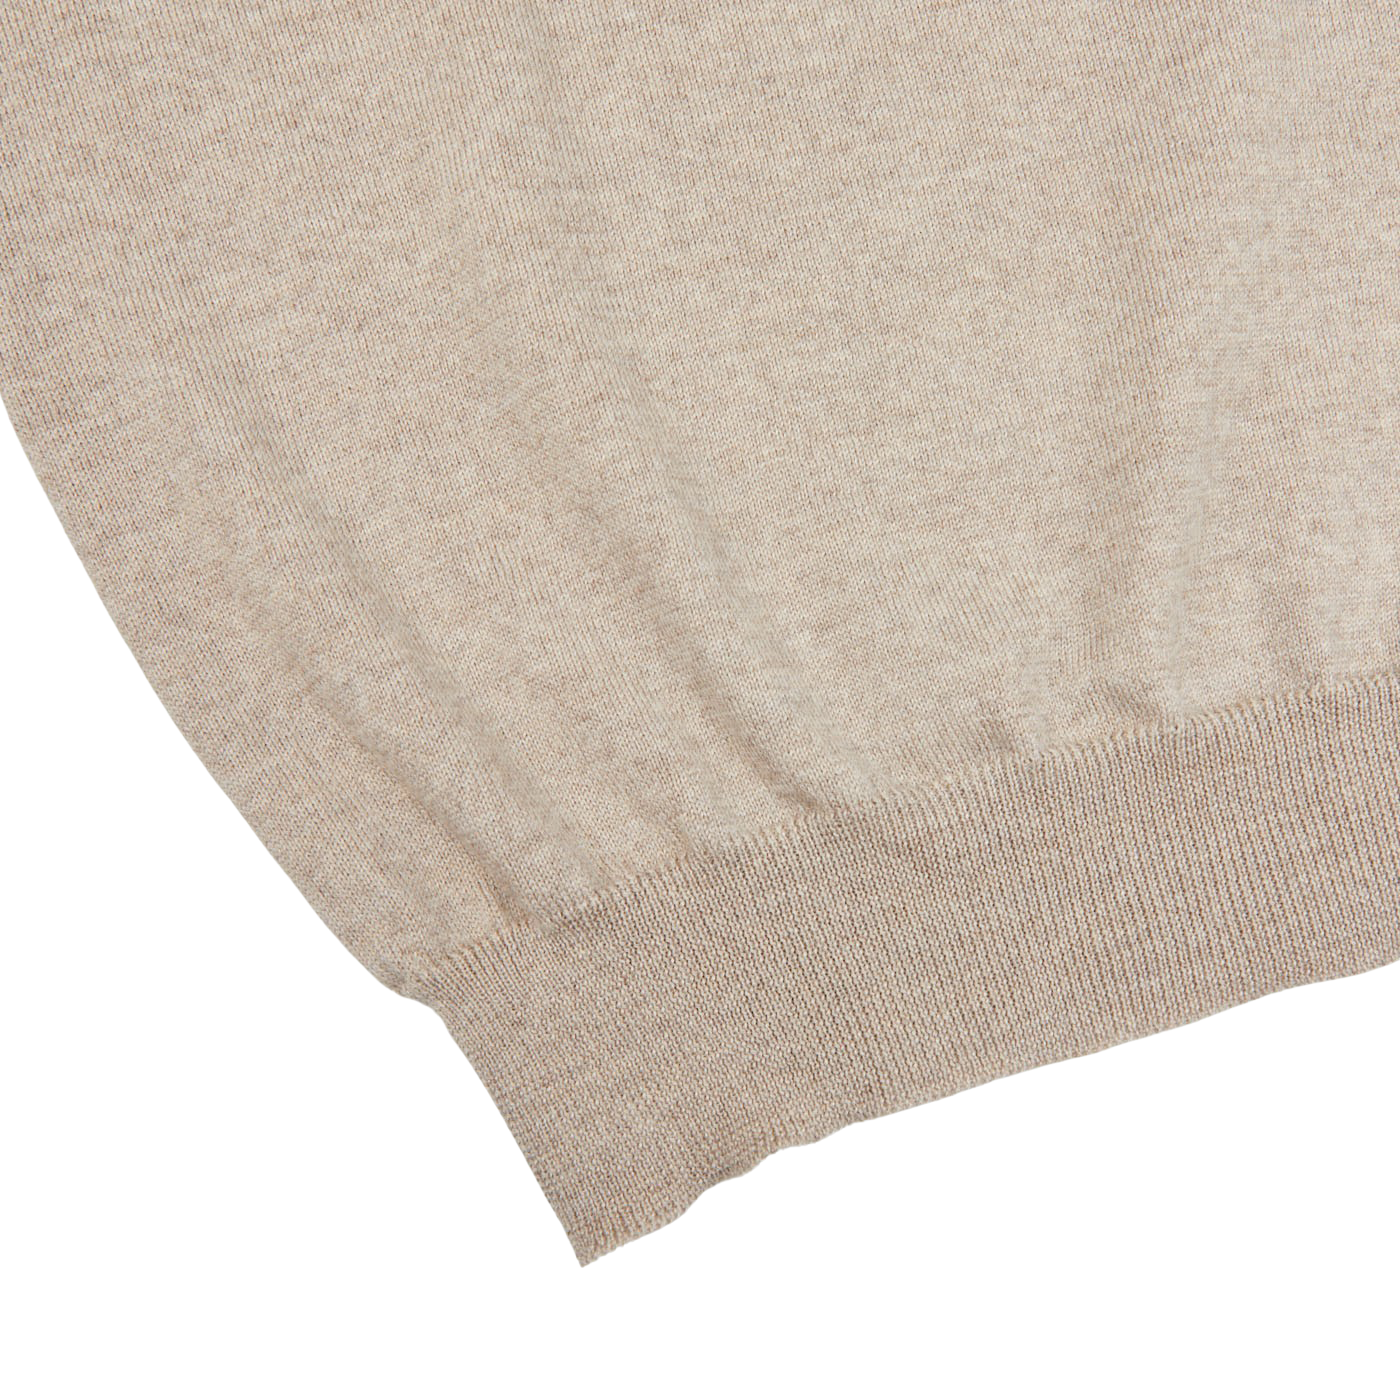 A close up of a Light Beige Merino Wool One-Piece Collar Polo Shirt by Gran Sasso on a white surface.